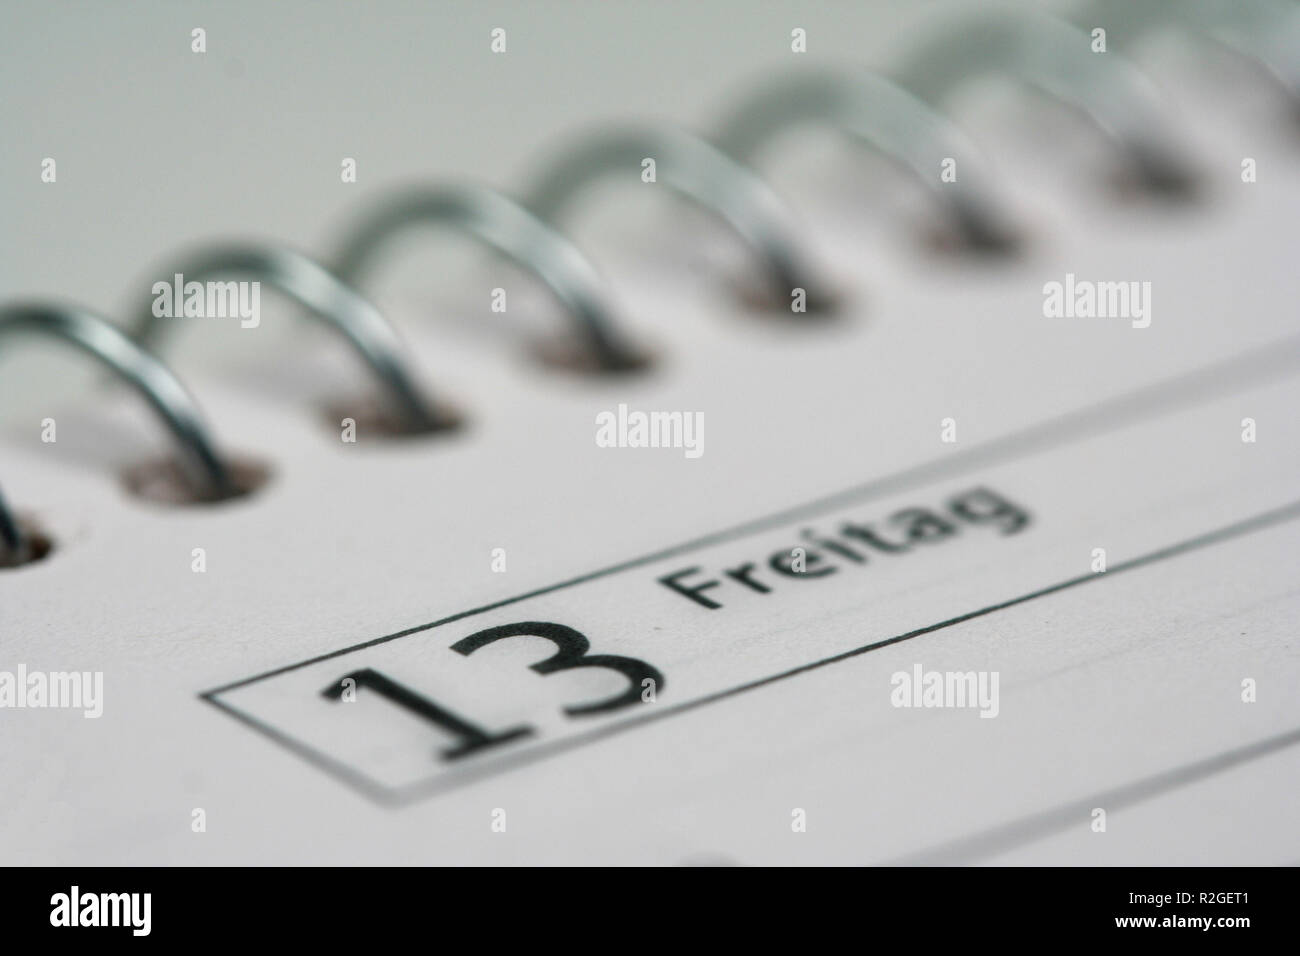 friday the 13th. Stock Photo